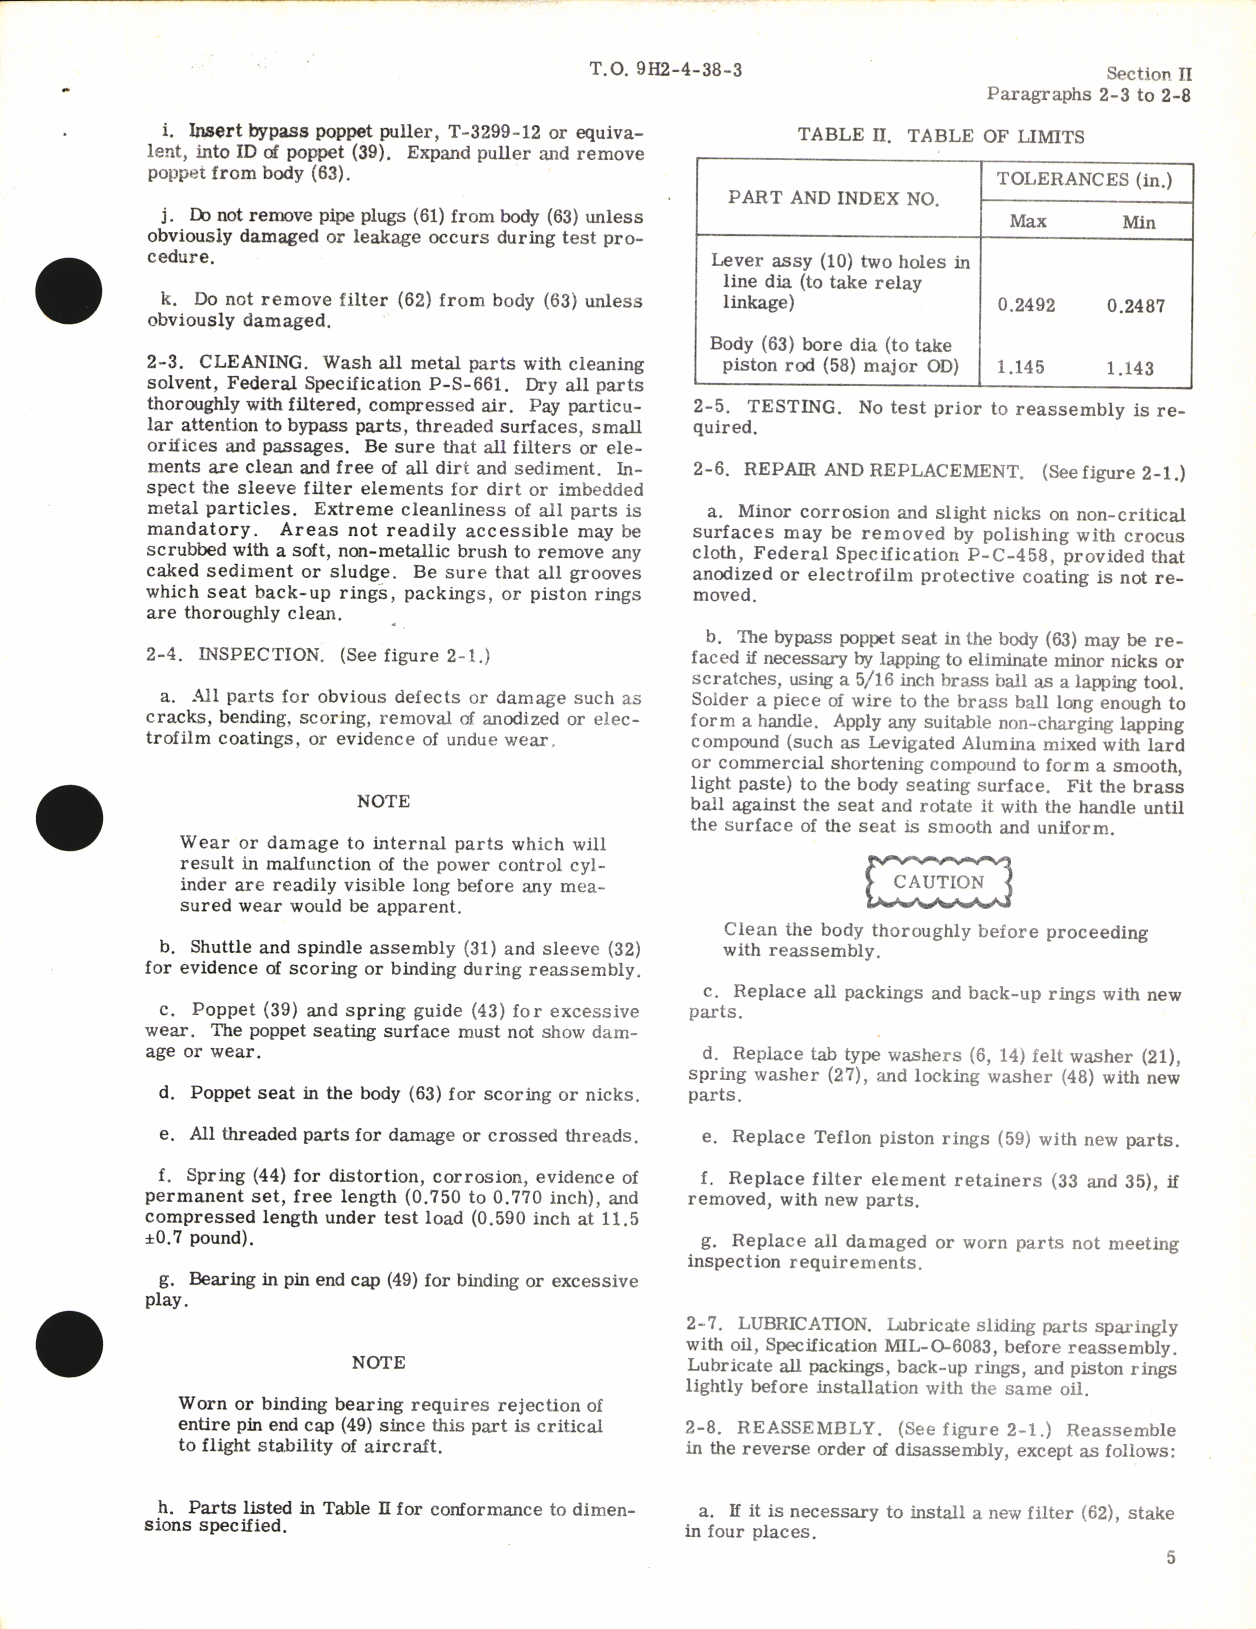 Sample page 7 from AirCorps Library document: Overhaul Instructions for Single Servo Power Control Cylinder Part No. 11570-1